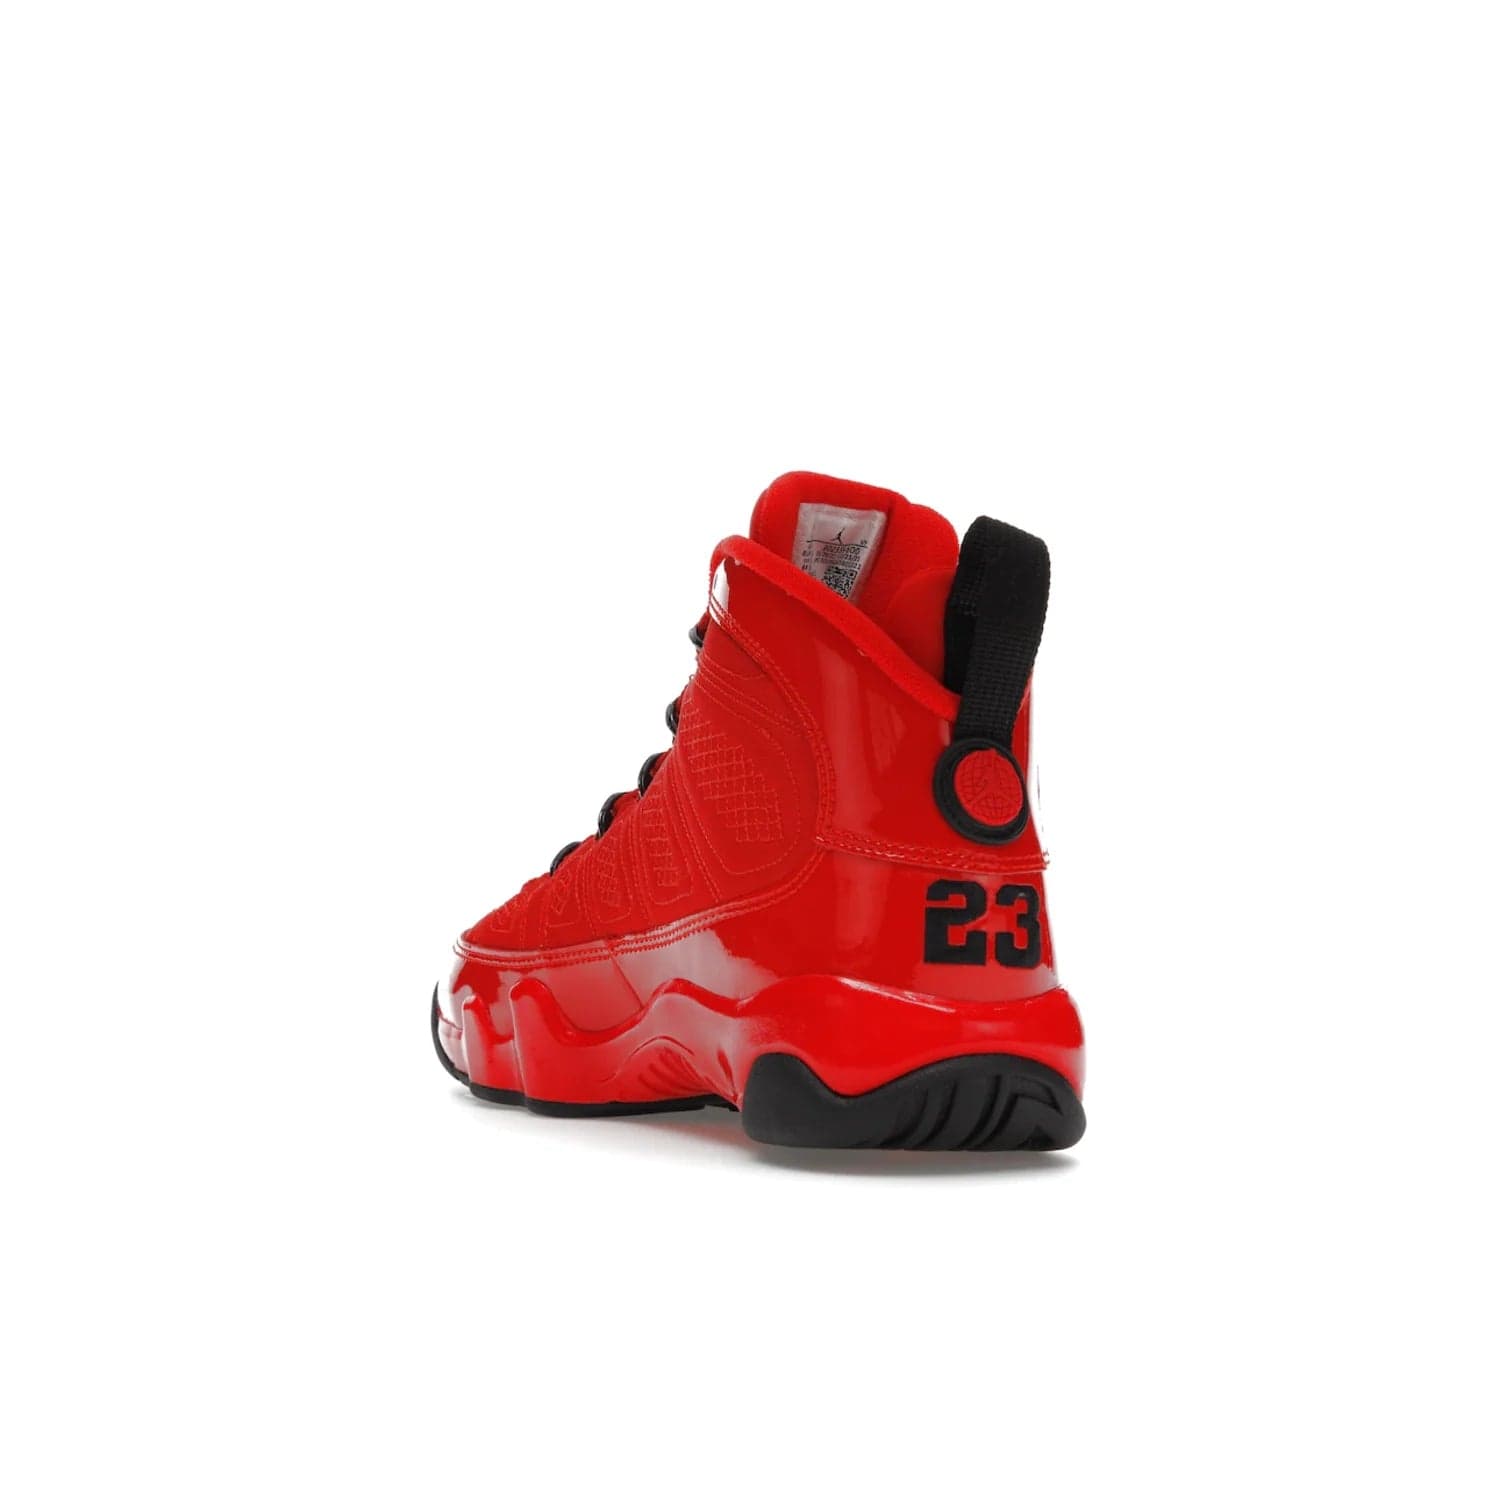 Jordan 9 Retro Chile Red (GS) - Image 25 - Only at www.BallersClubKickz.com - Introducing the Air Jordan 9 Retro Chile Red (GS), a vintage 1993 silhouette with fiery colorway. Features quilted side paneling, glossy patent leather, pull tabs, black contrast accents, and foam midsole. Launching May 2022 for $140.